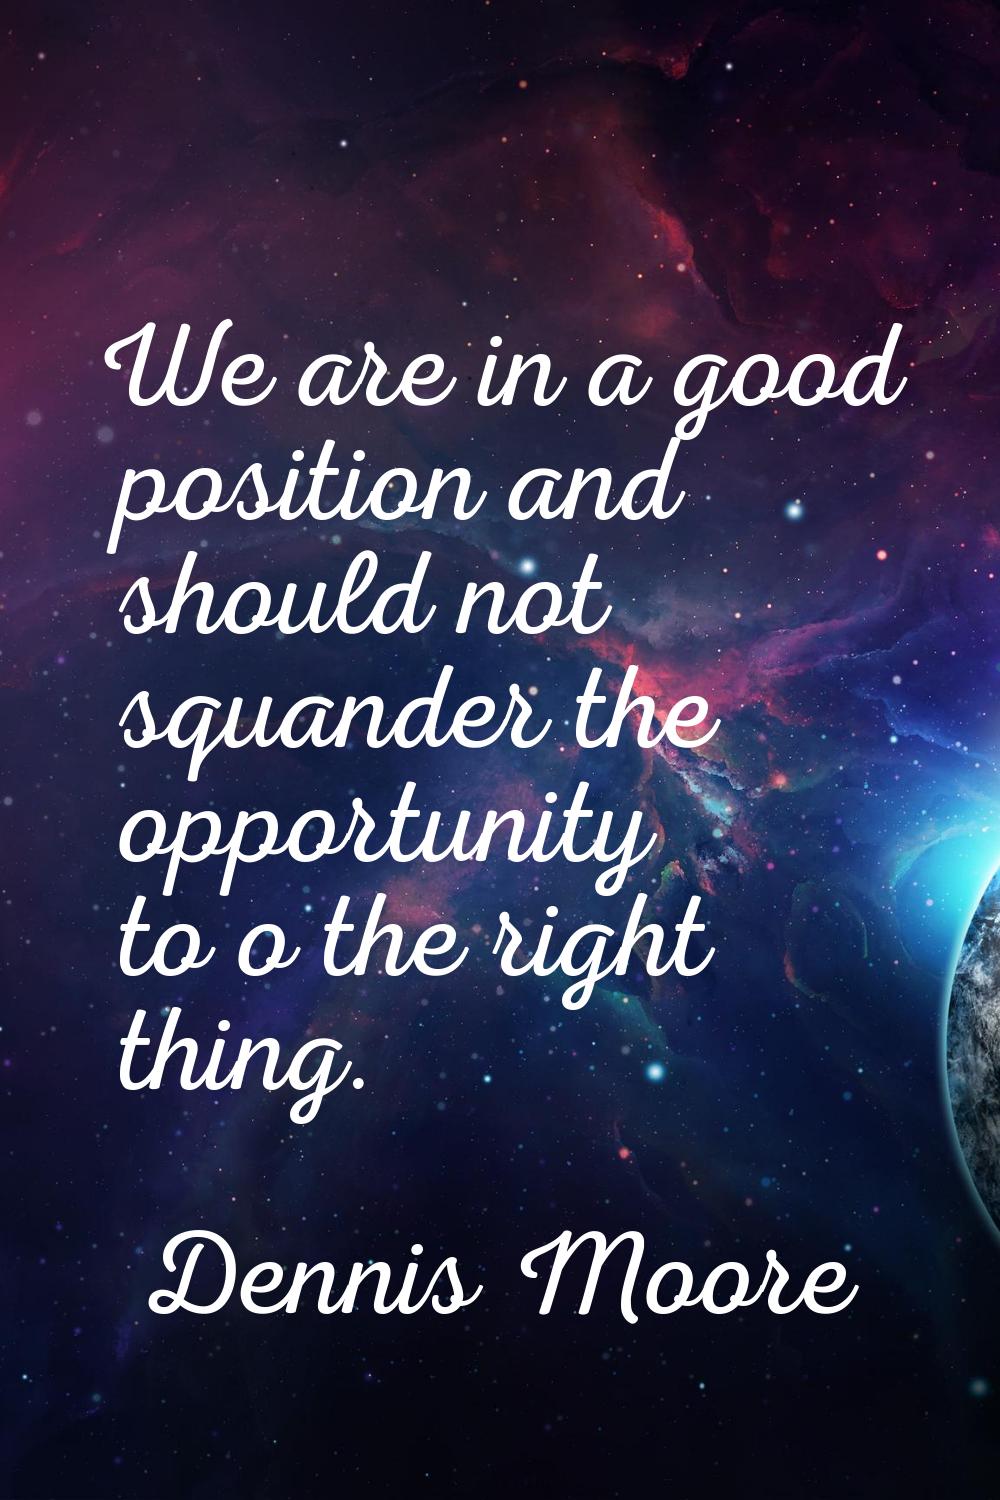 We are in a good position and should not squander the opportunity to o the right thing.